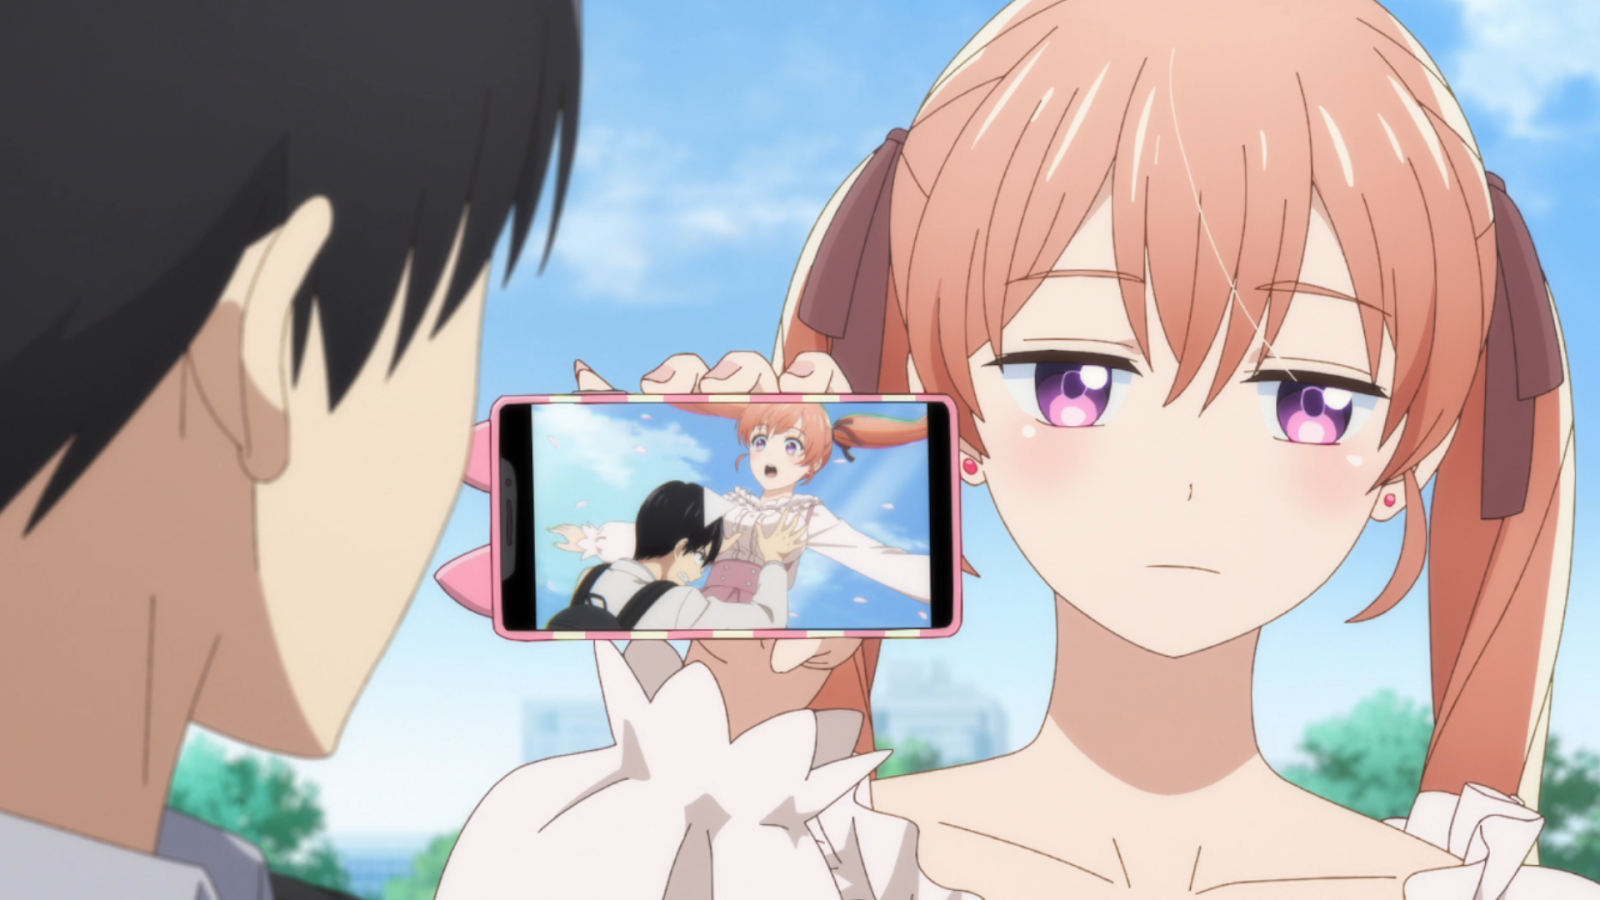 Best Harem Anime to Watch: Rent-A-Girlfriend, A Couple of Cuckoos